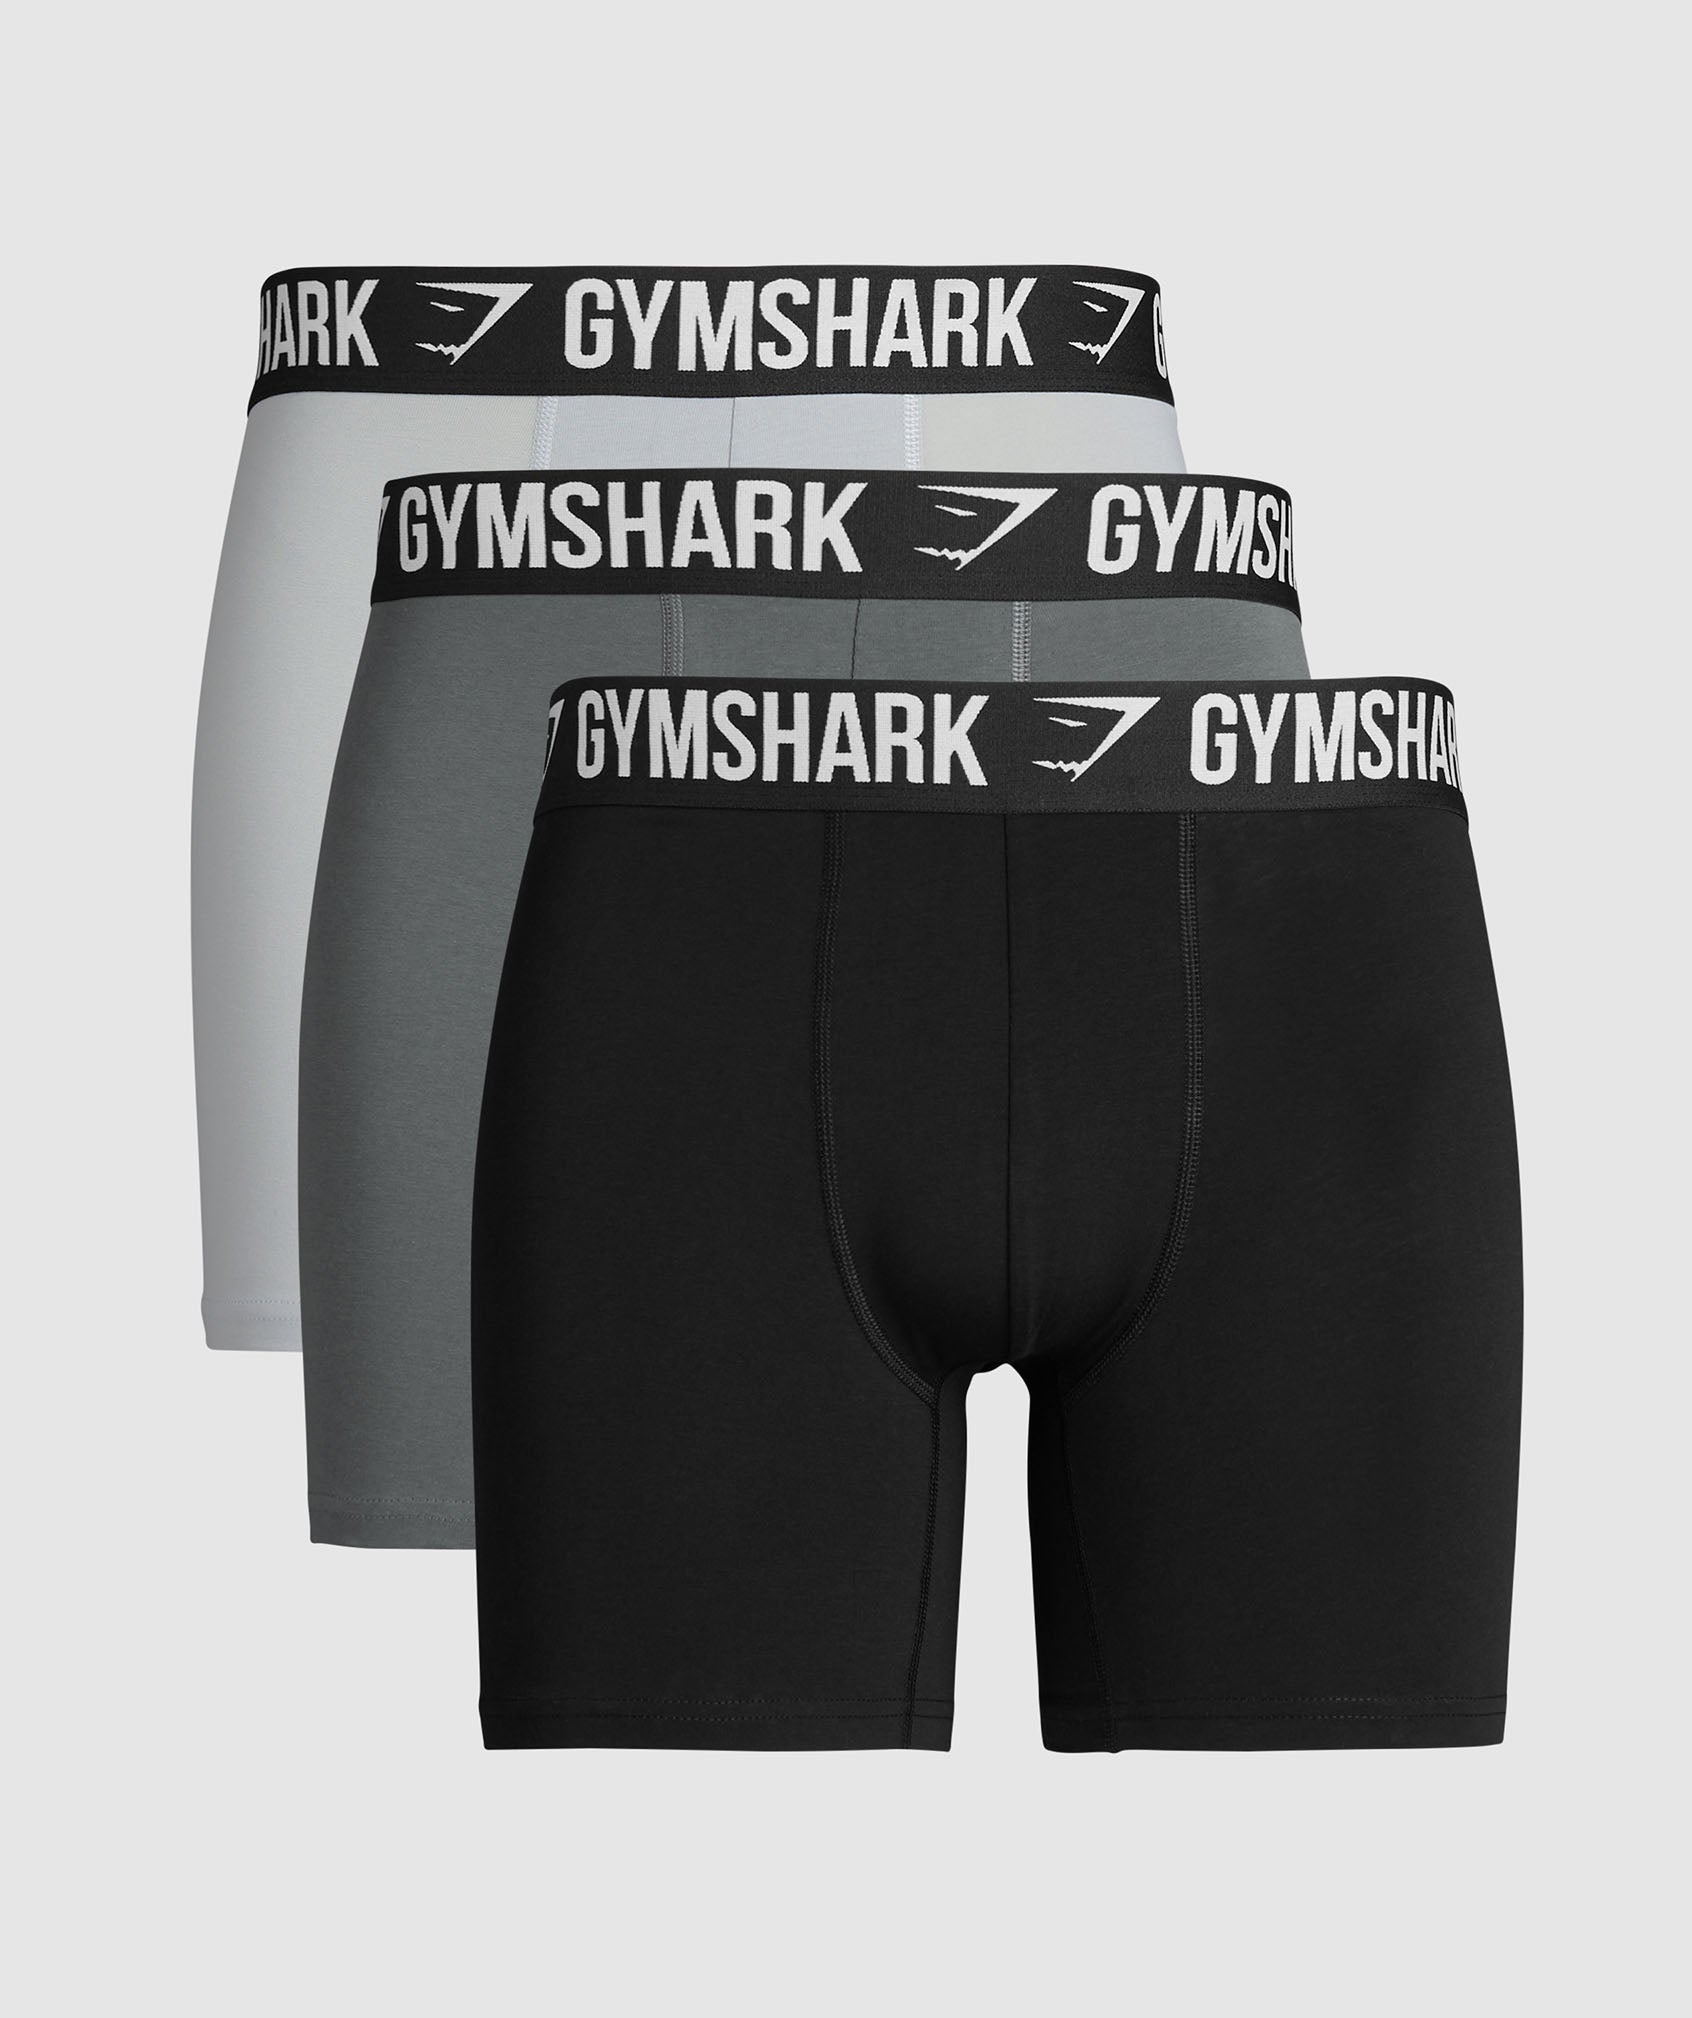 Gymshark on X: Trunks or Hipsters? It's National Underwear Day so